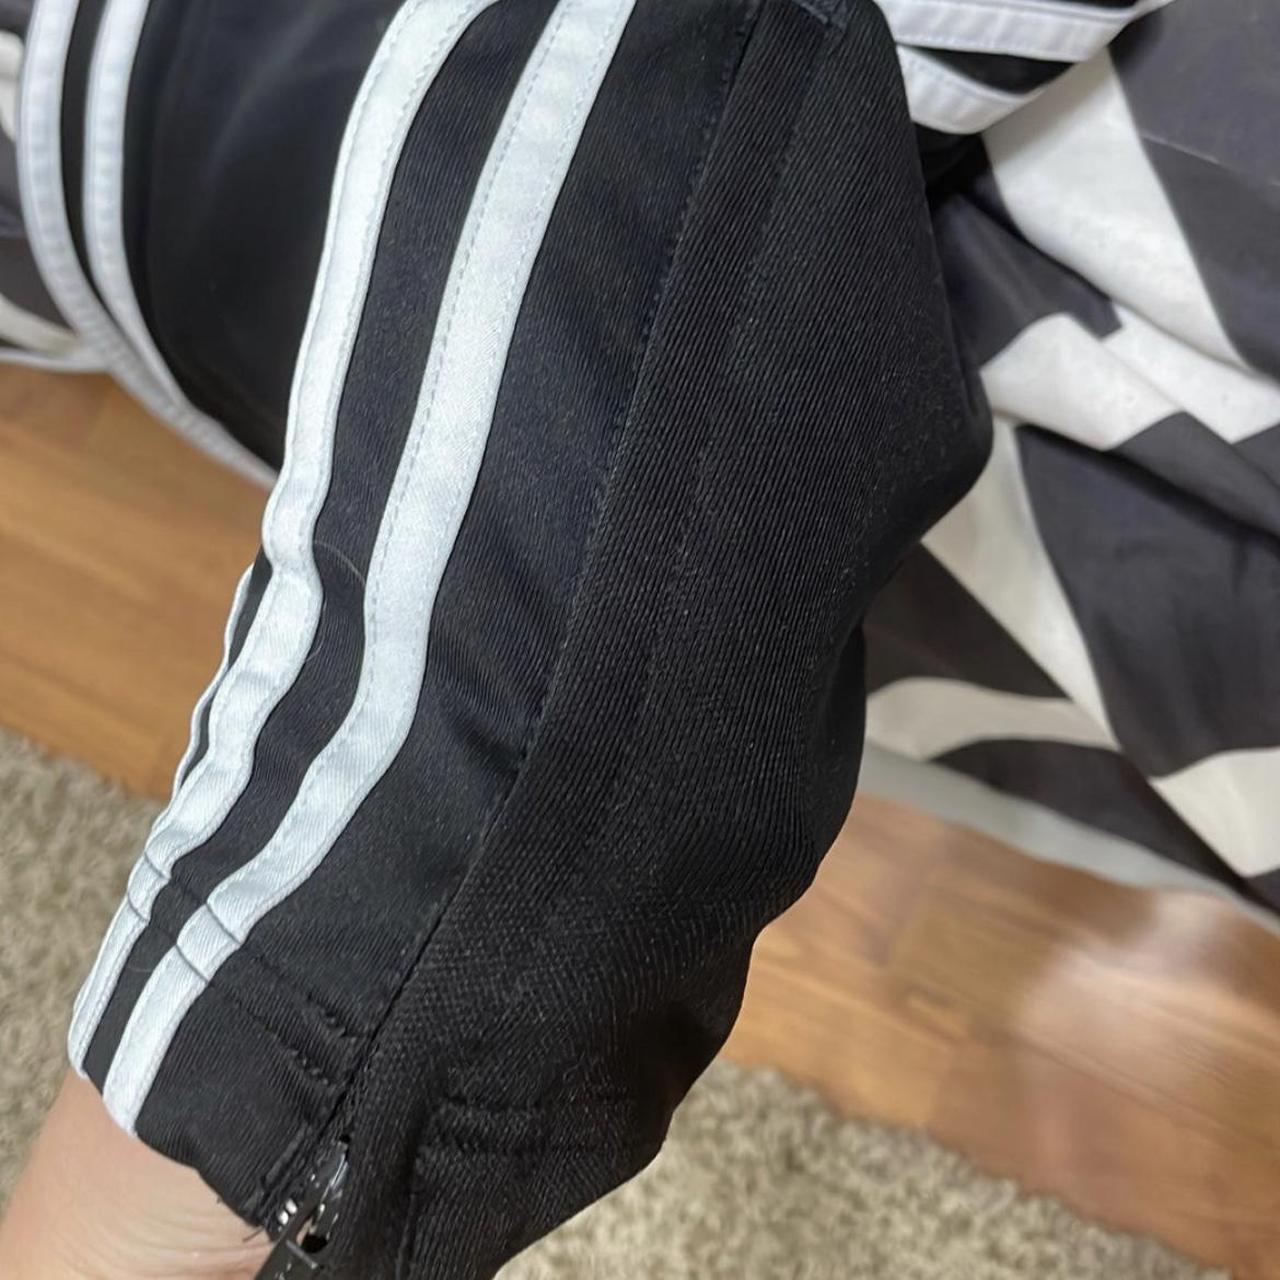 Adidas Women's Black and White Joggers-tracksuits (3)